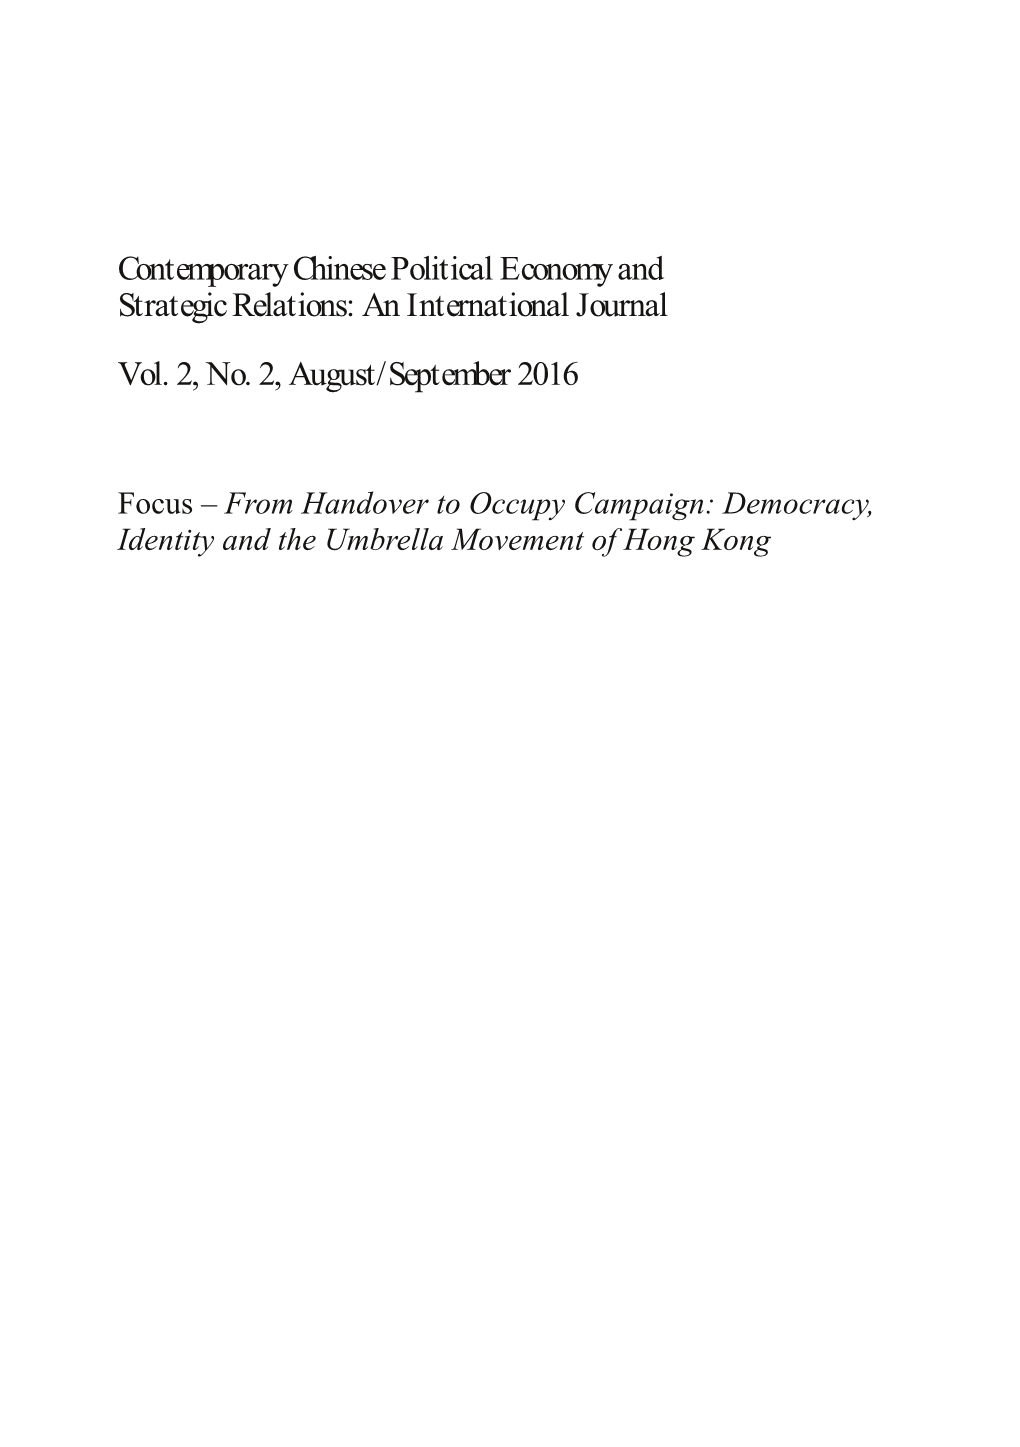 Contemporary Chinese Political Economy and Strategic Relations: an International Journal